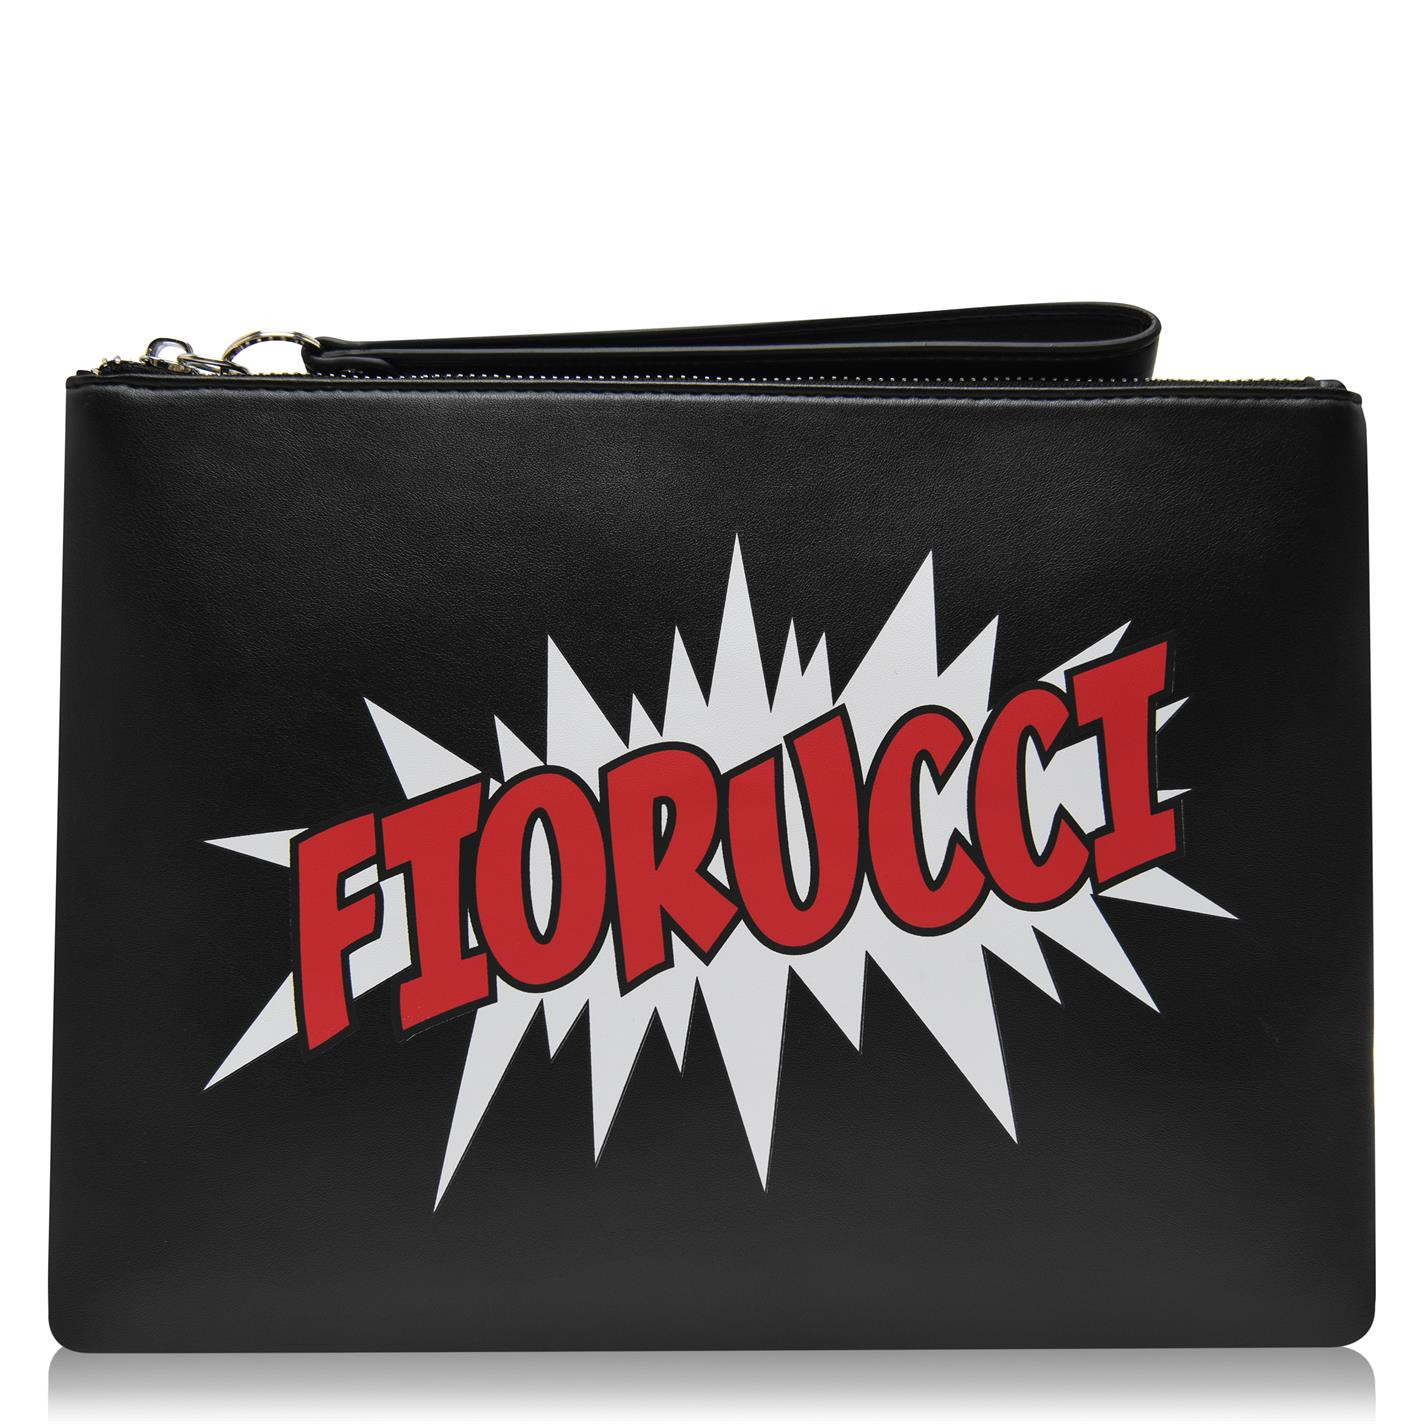 FIORUCCI OVERSIZED BANG POUCH BAG 41795 - BLACK - ONE SIZE